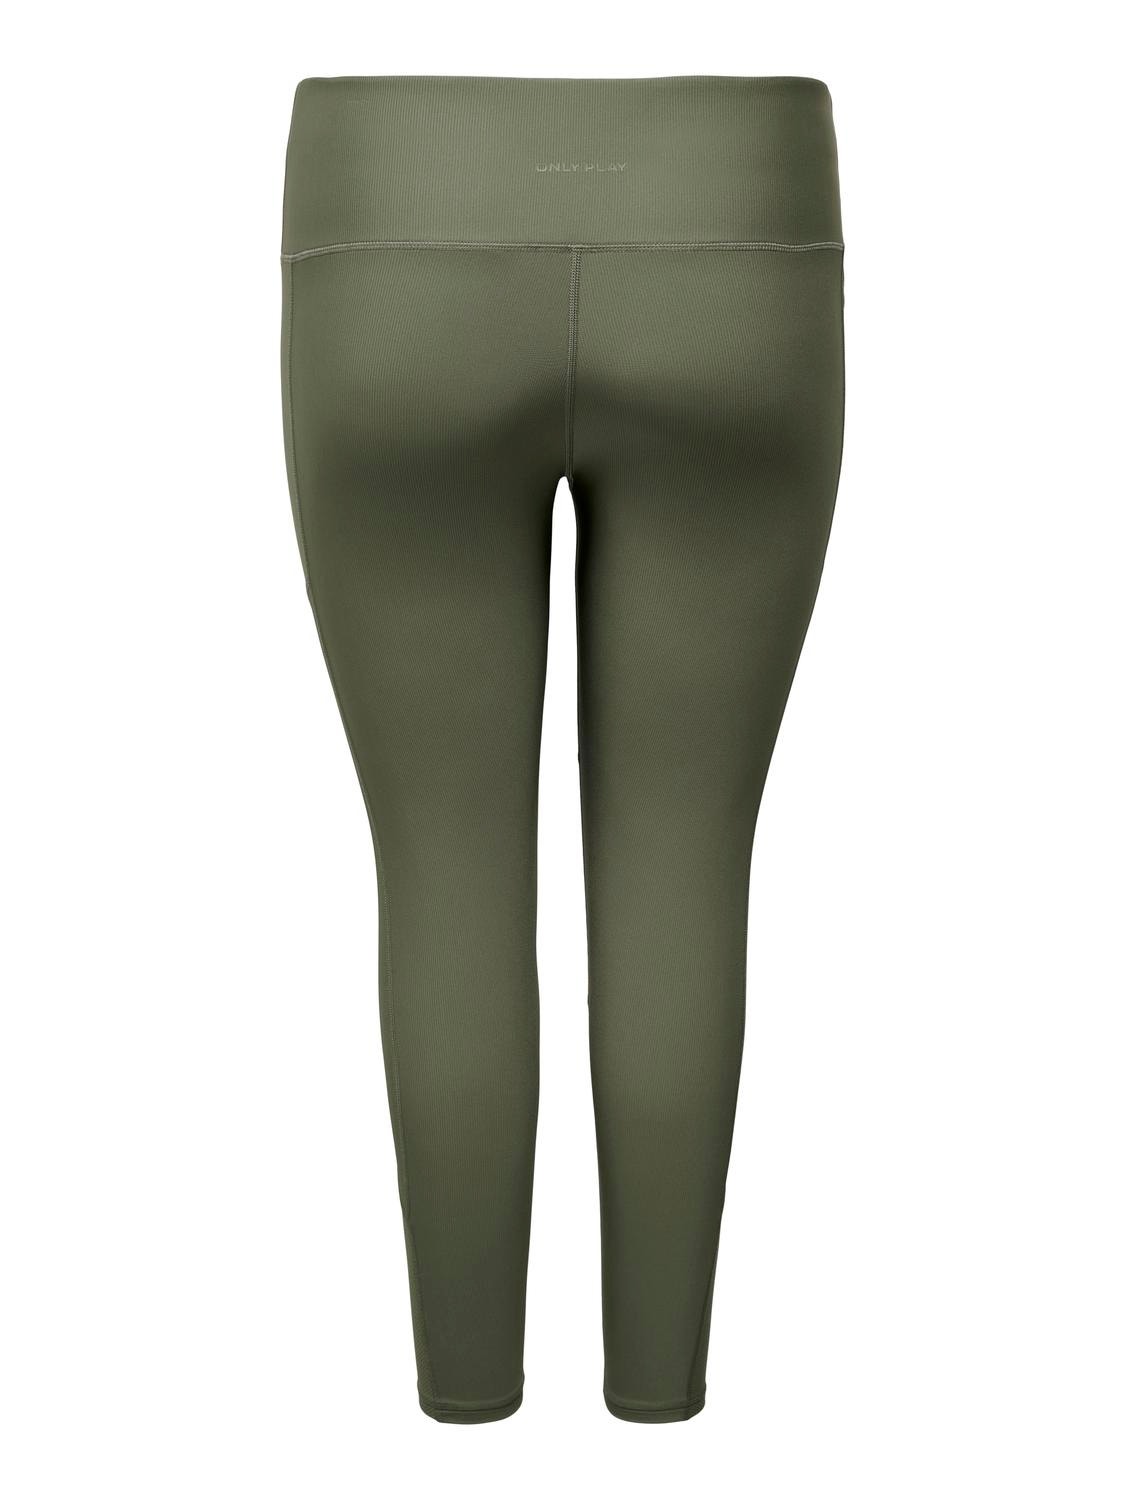 ONLY Tight Fit High waist Curve Leggings -Dusty Olive - 15276824